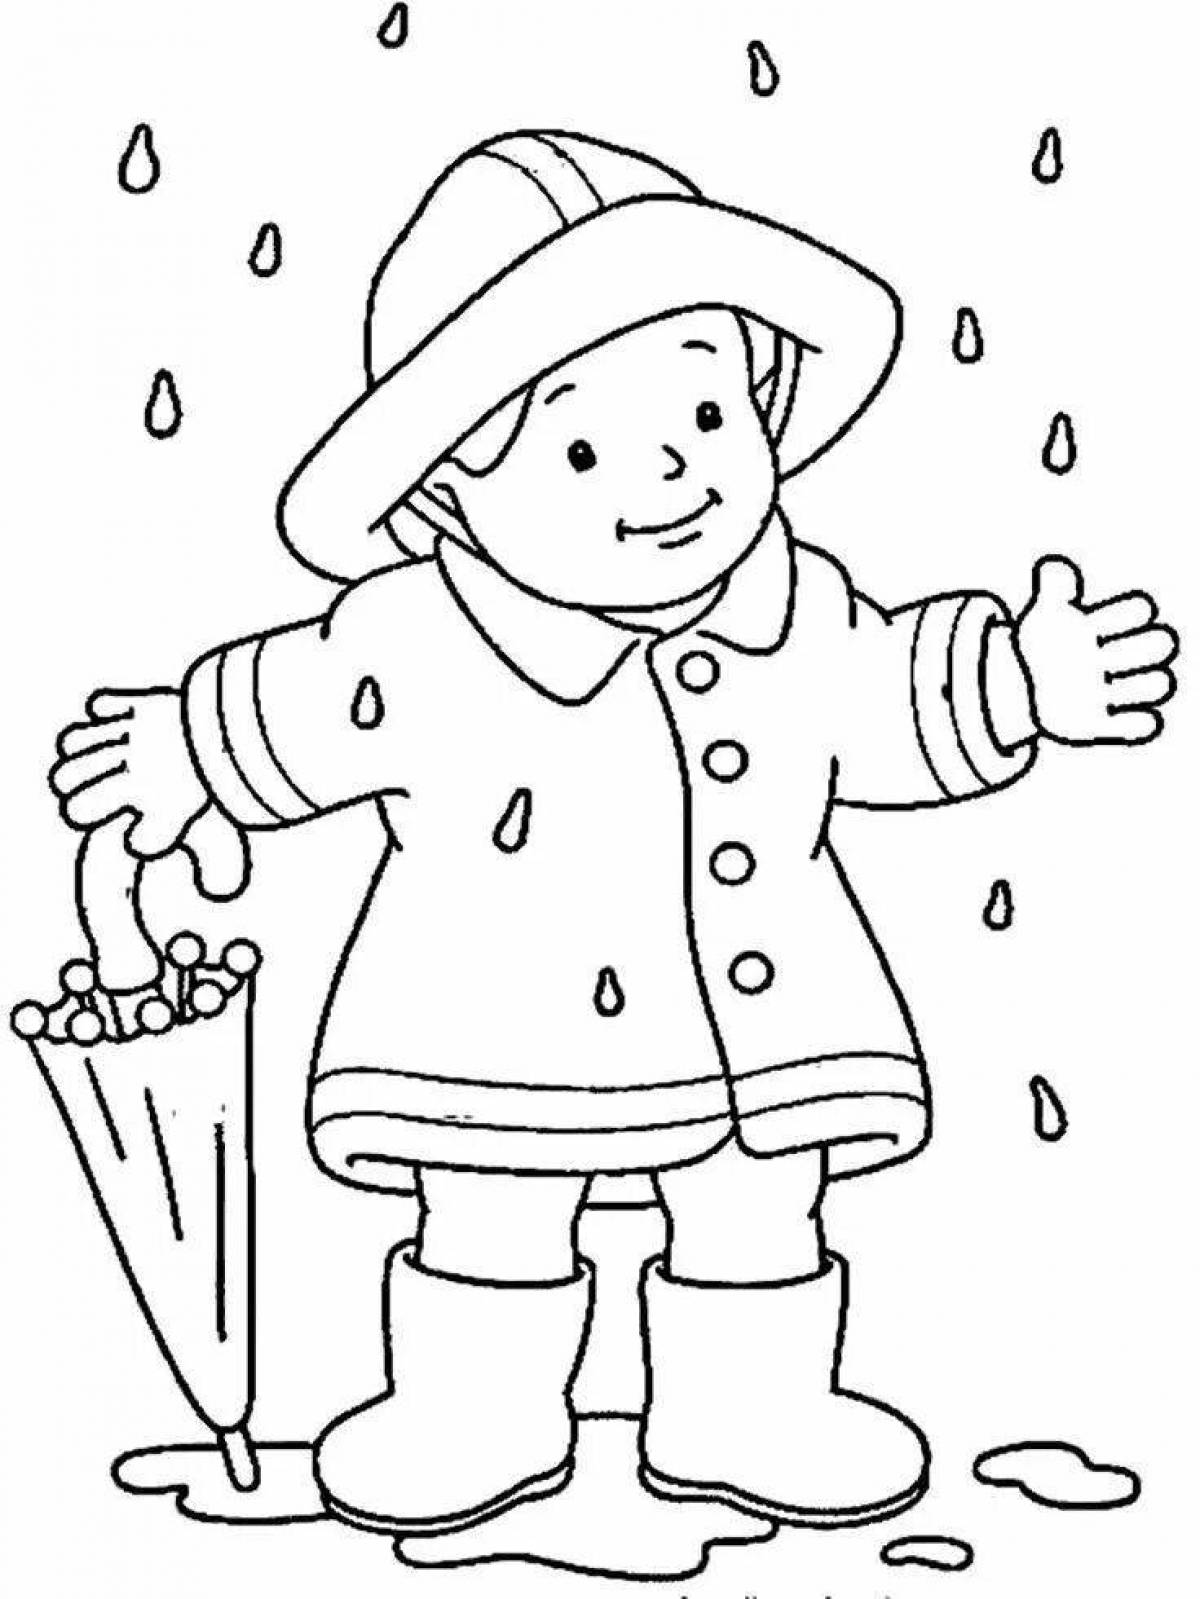 Glitter coloring book for children boy in winter clothes